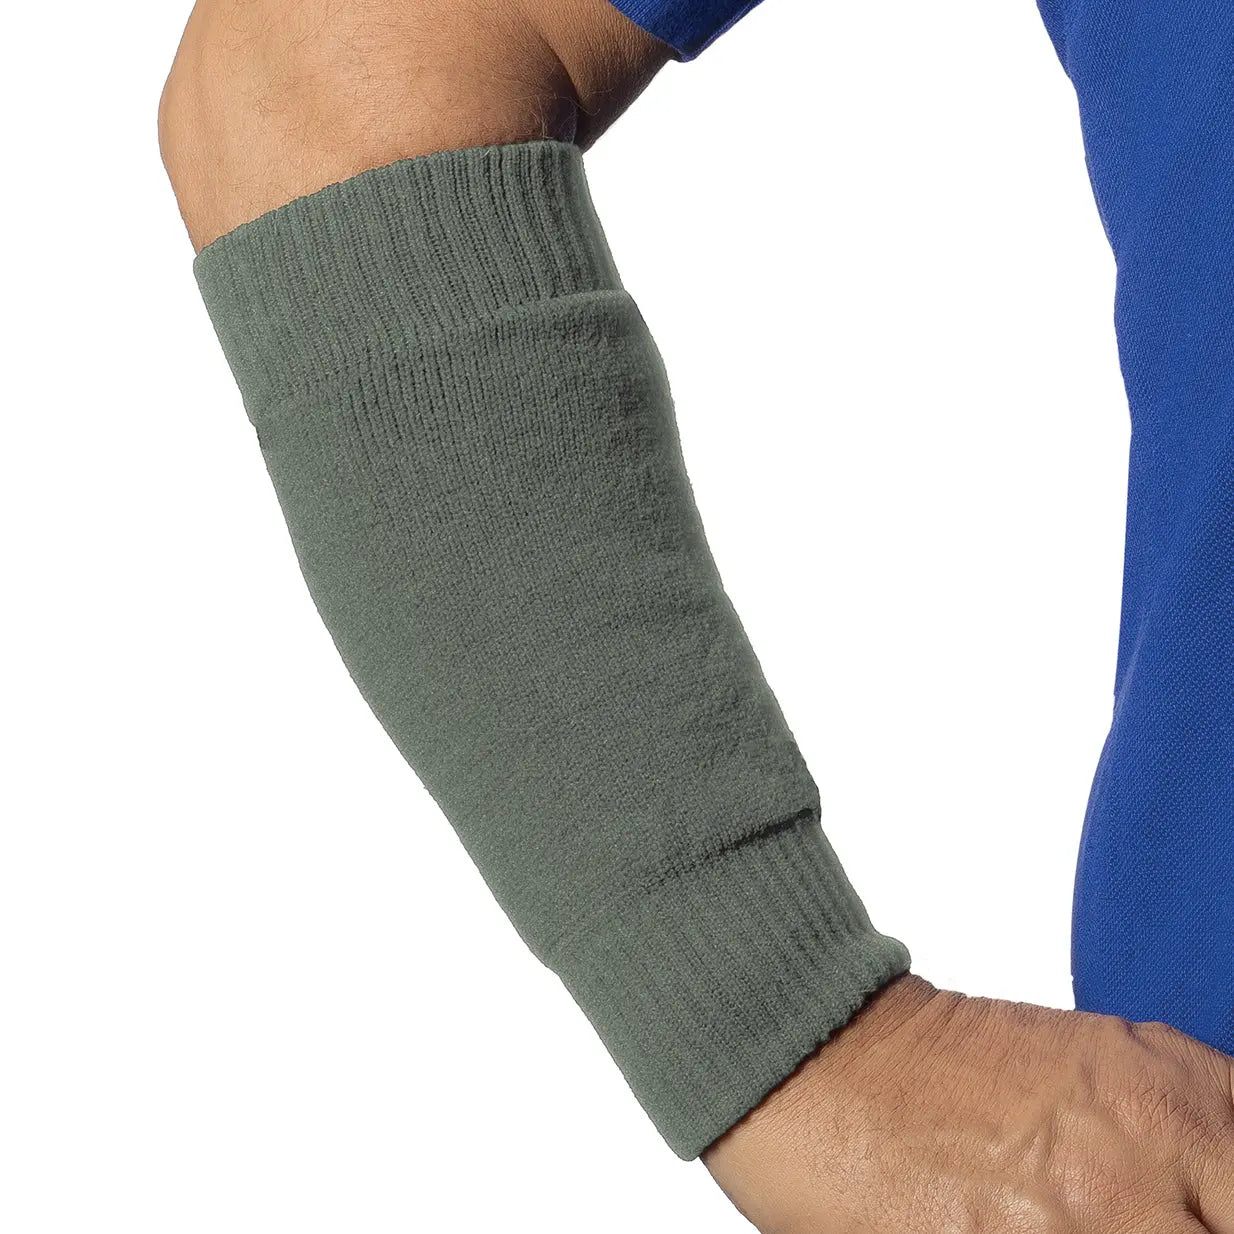 Forearm Sleeves - Light Weight. Protect Frail Skin. Prevent Skin Tears (pair) Limbkeepers